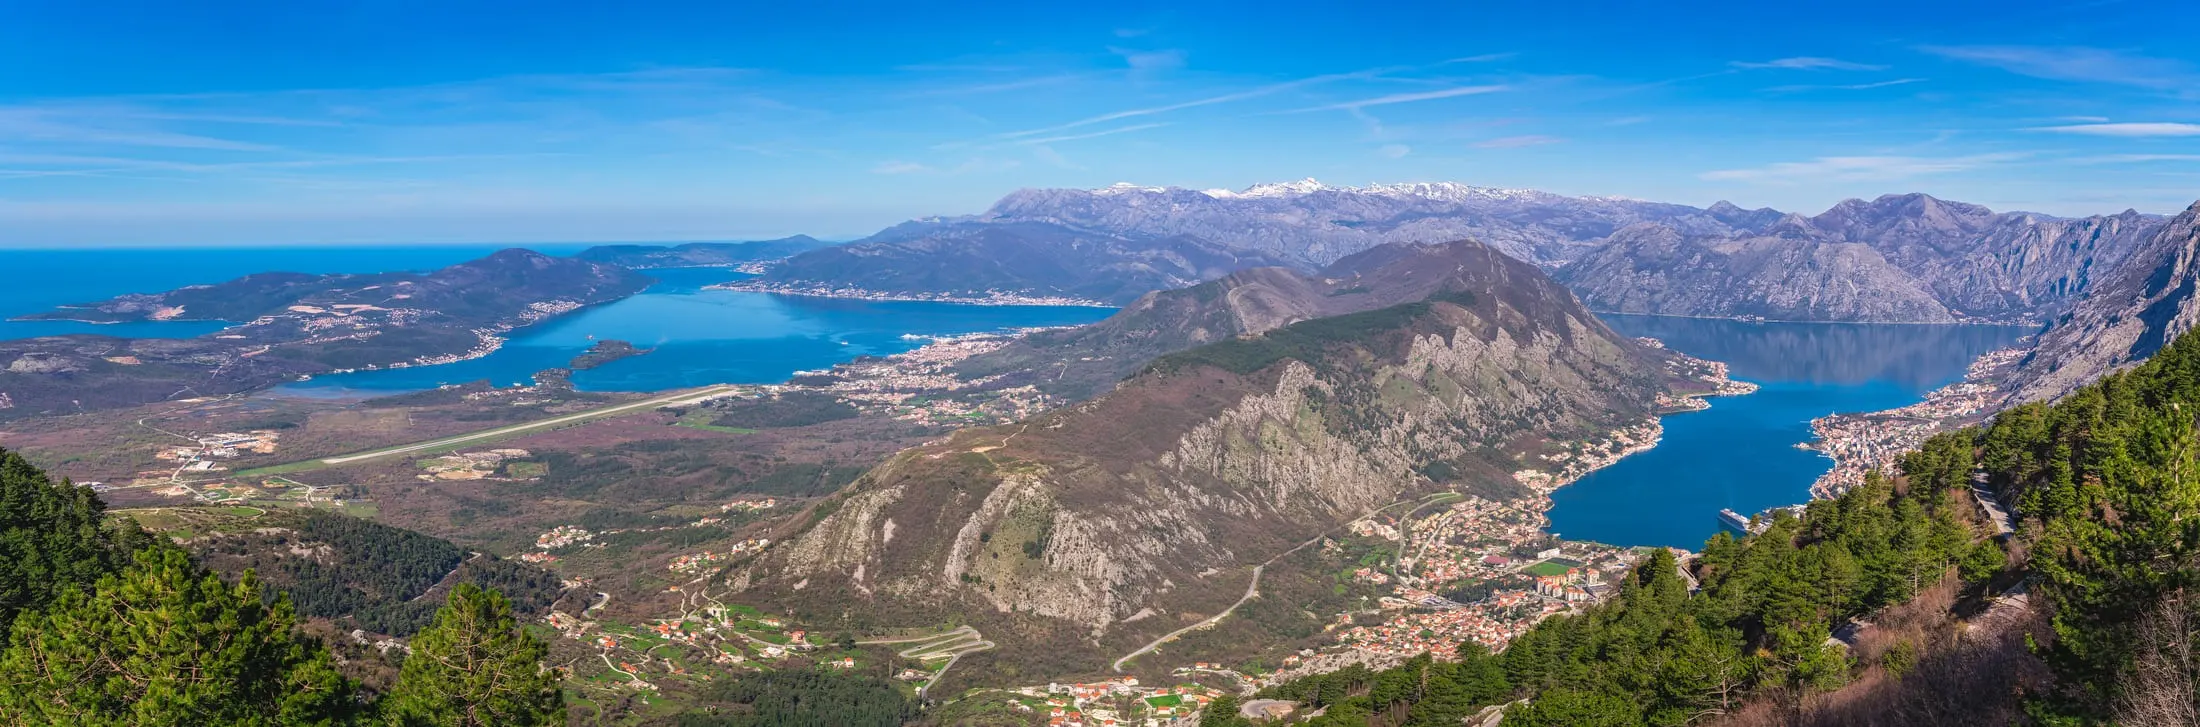 Stunning view of Bay of Kotor from Lovcen